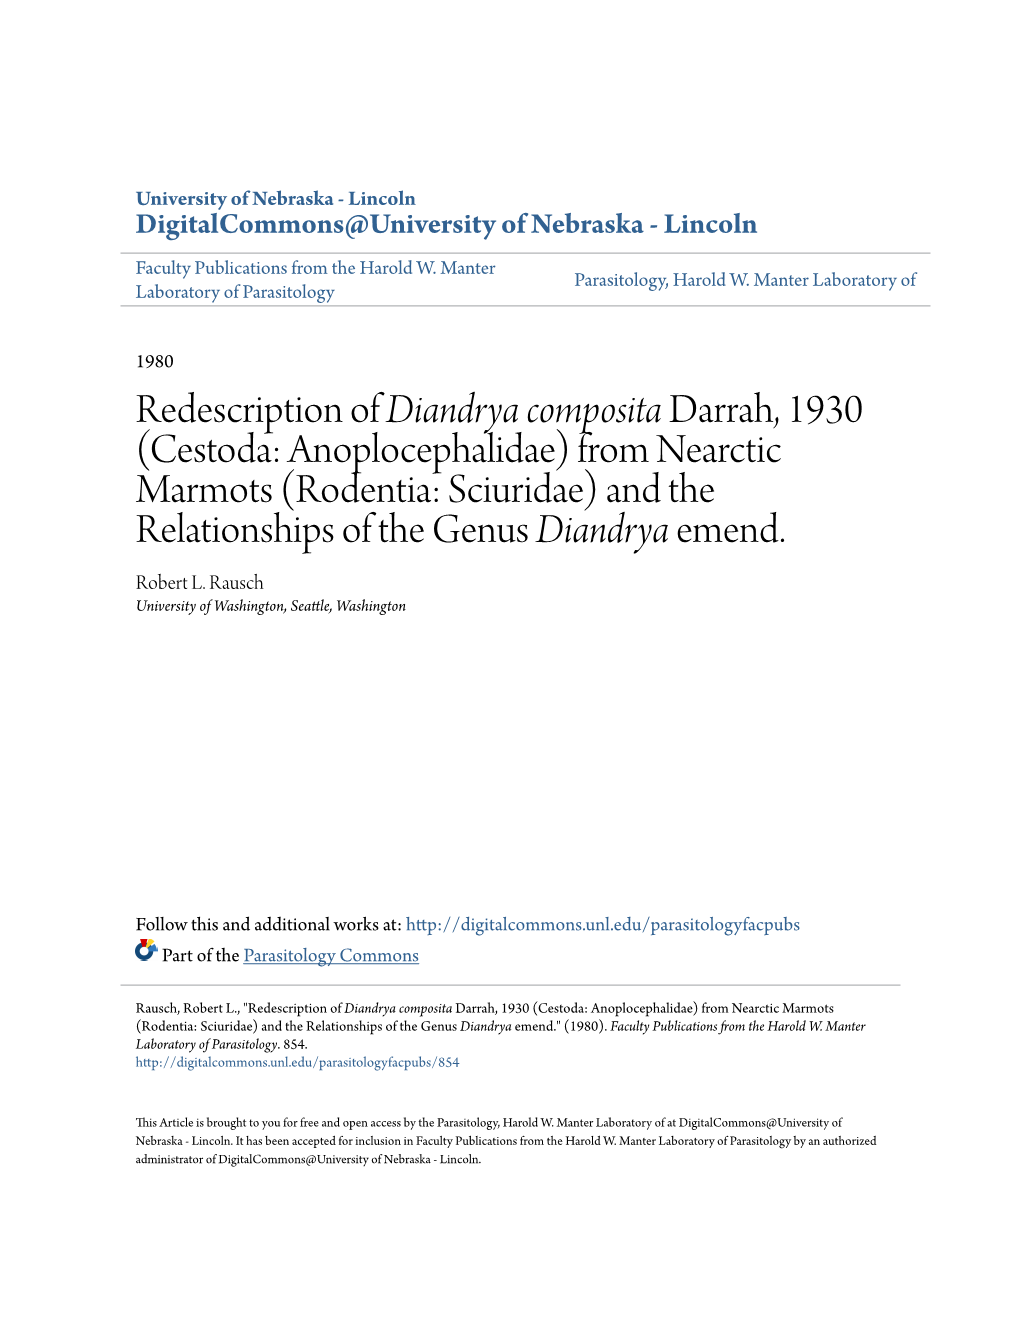 Cestoda: Anoplocephalidae) from Nearctic Marmots (Rodentia: Sciuridae) and the Relationships of the Genus Diandrya Emend